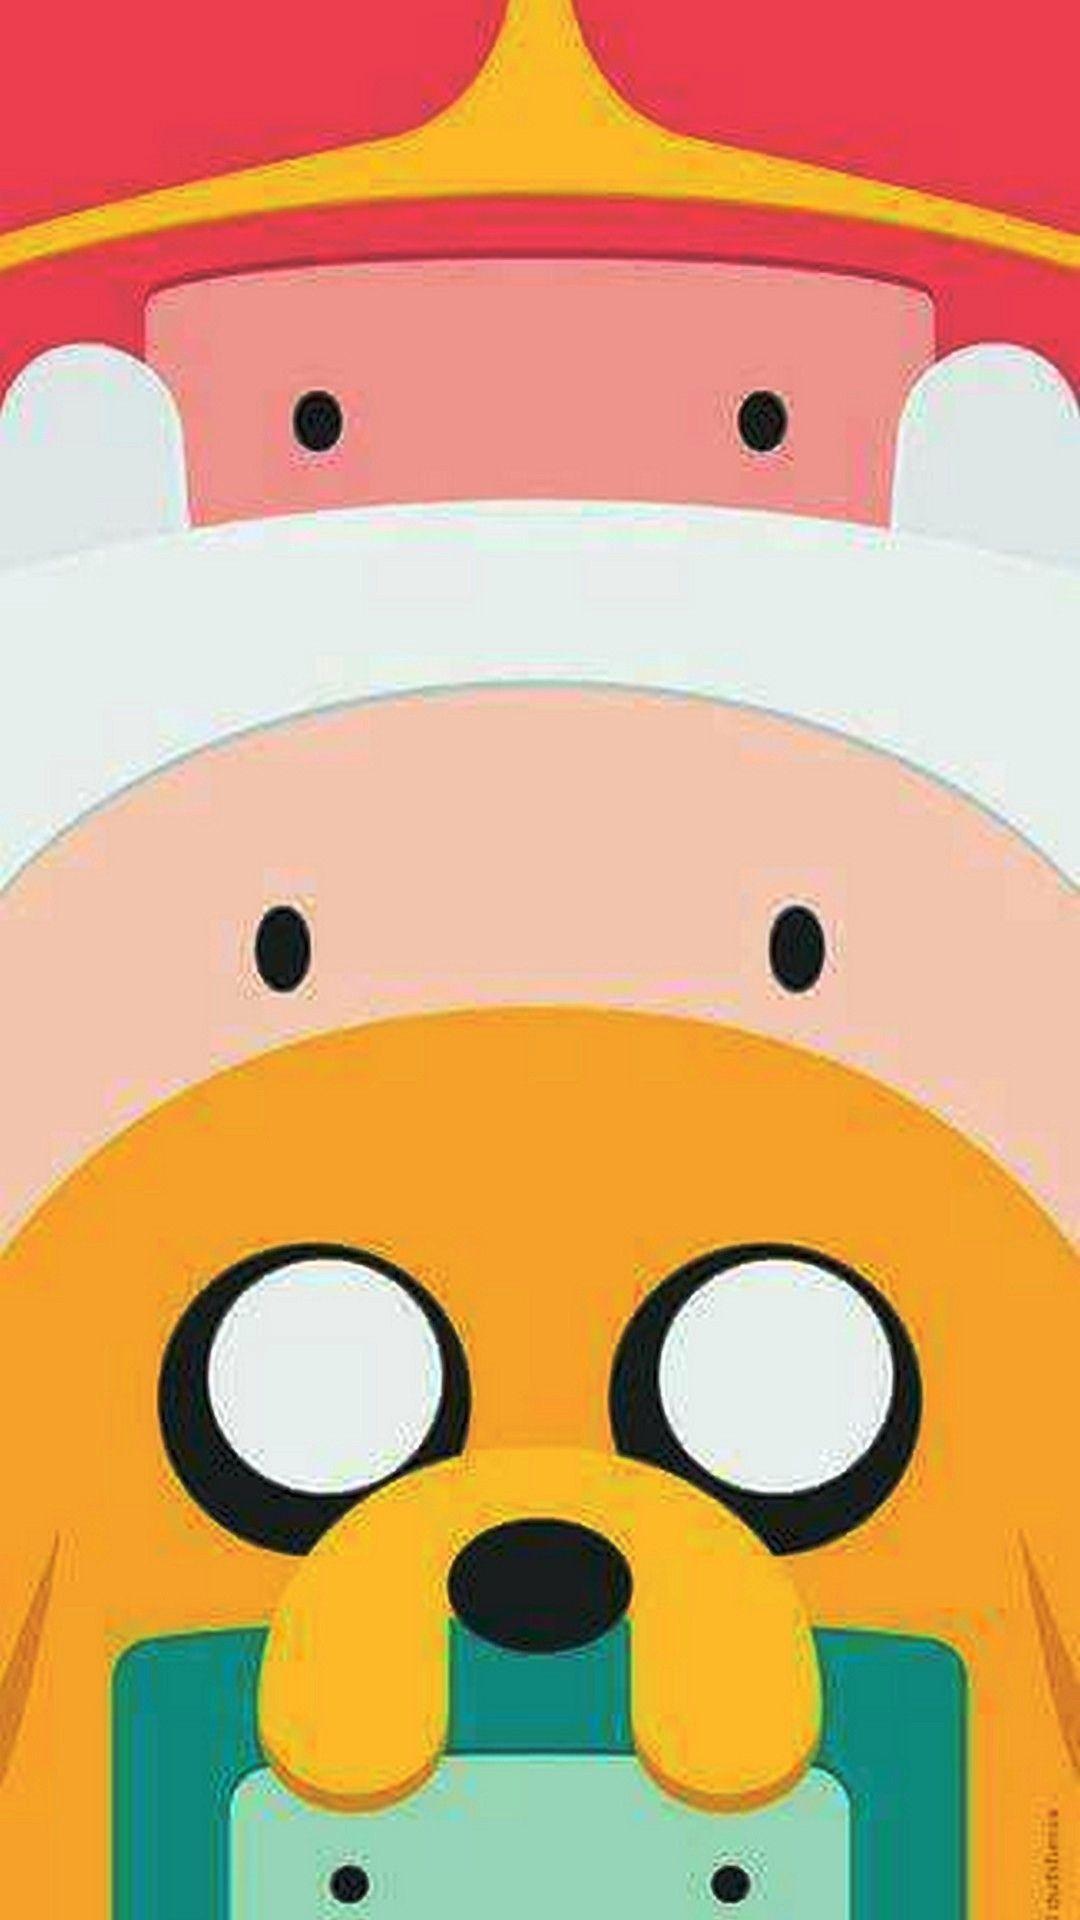 Mobile Wallpaper Adventure Time iPhone Wallpaper. Adventure time wallpaper, Adventure time iphone wallpaper, Cartoon wallpaper